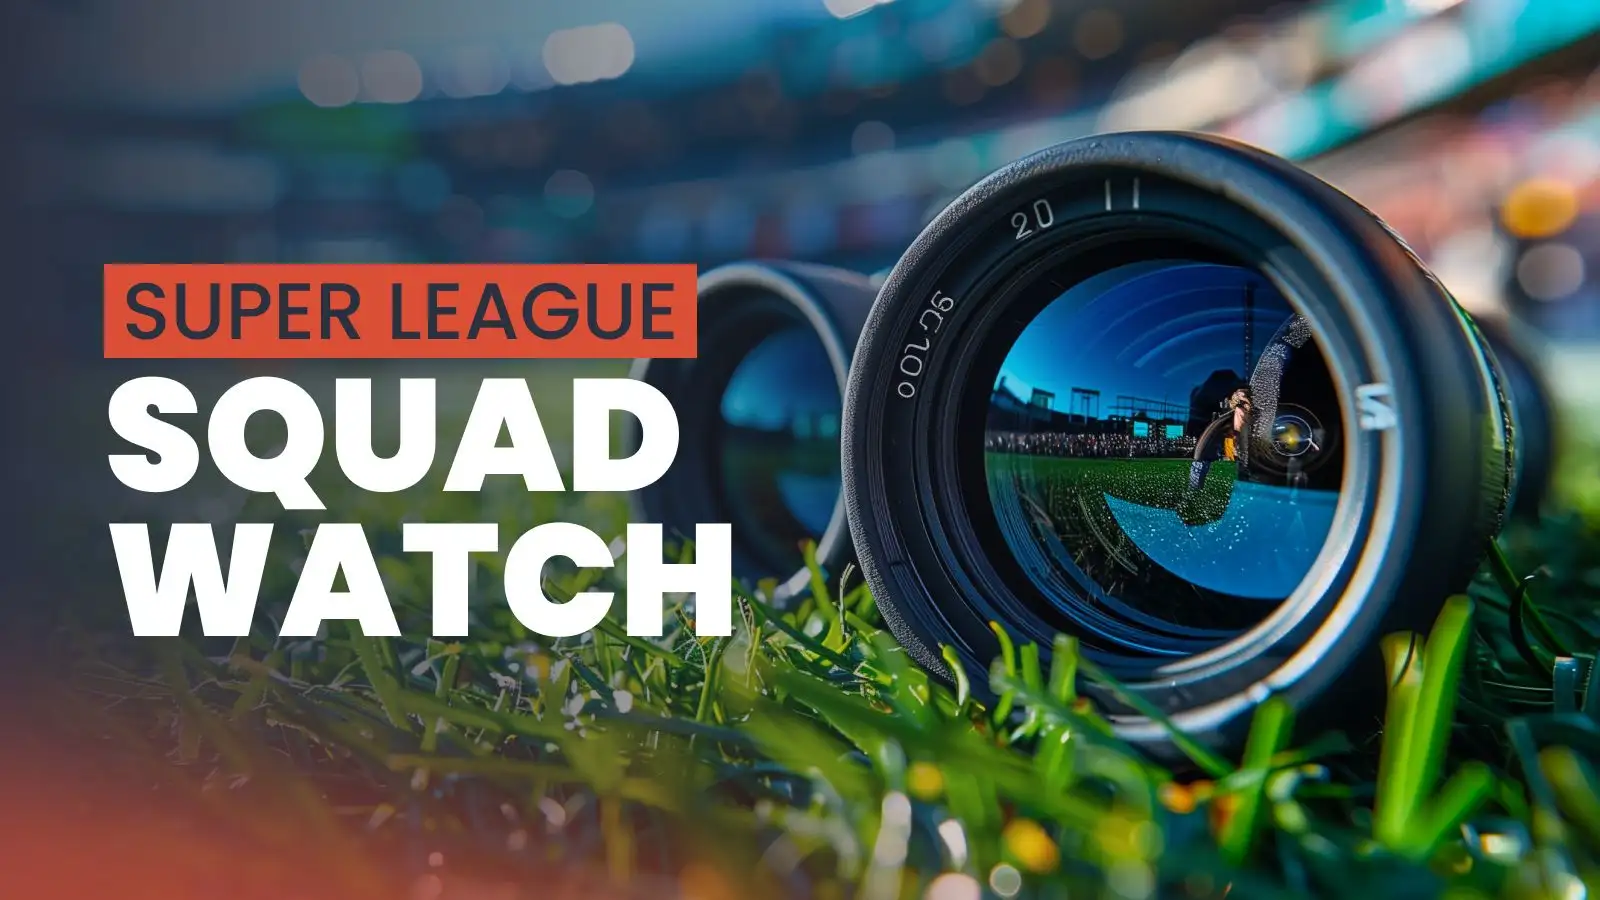 Squad watch: Super League team news, including TV coverage and kick-off times